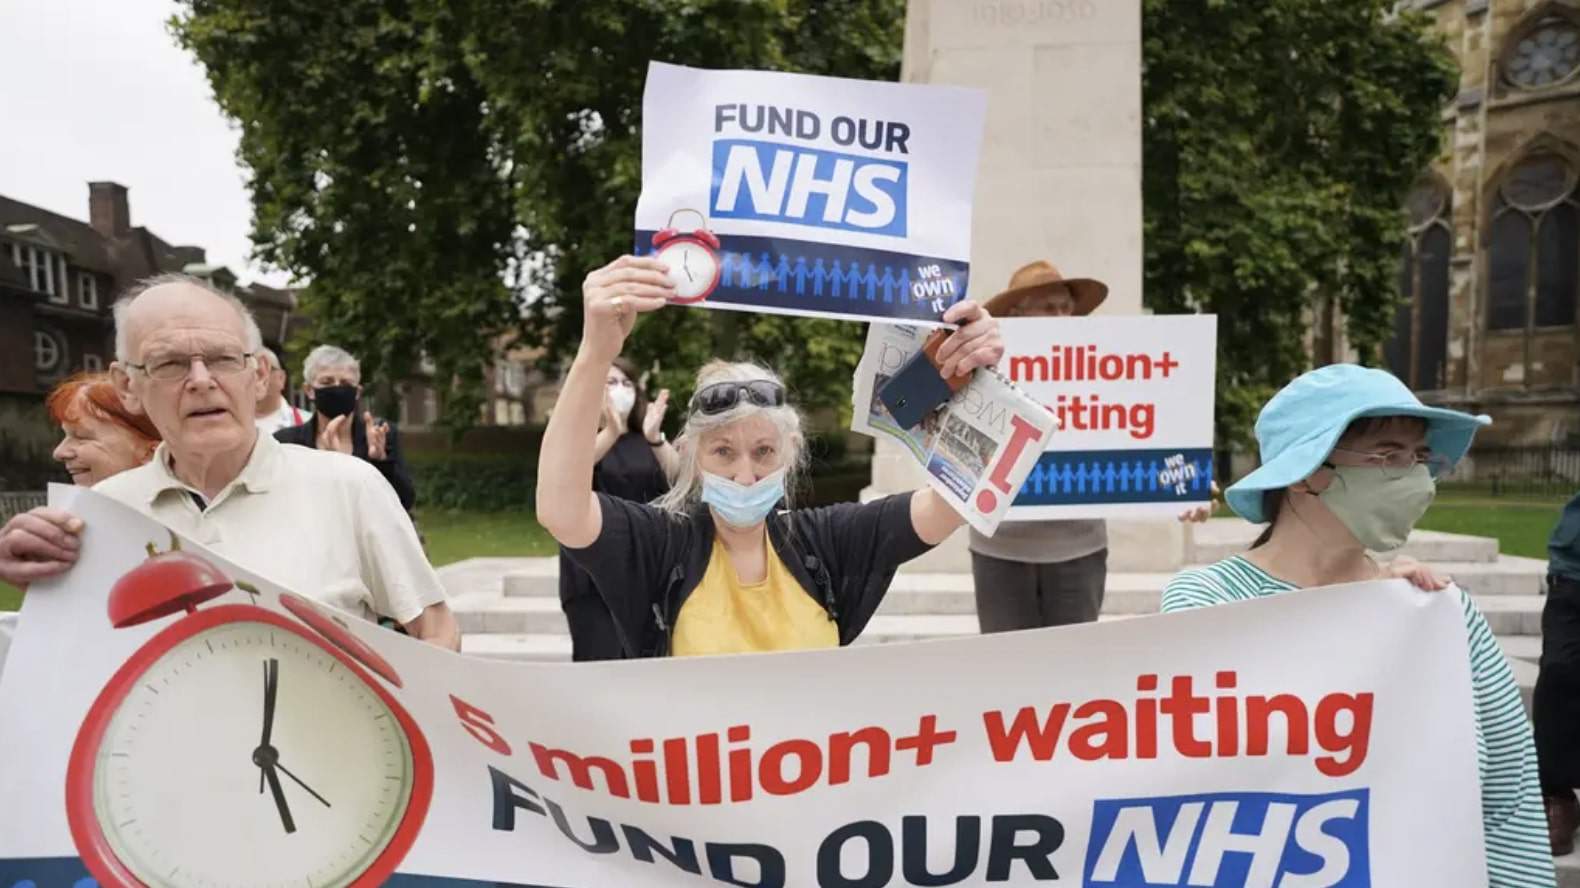 Pensioner in privatisation protest tells of NHS waiting list ‘limbo’